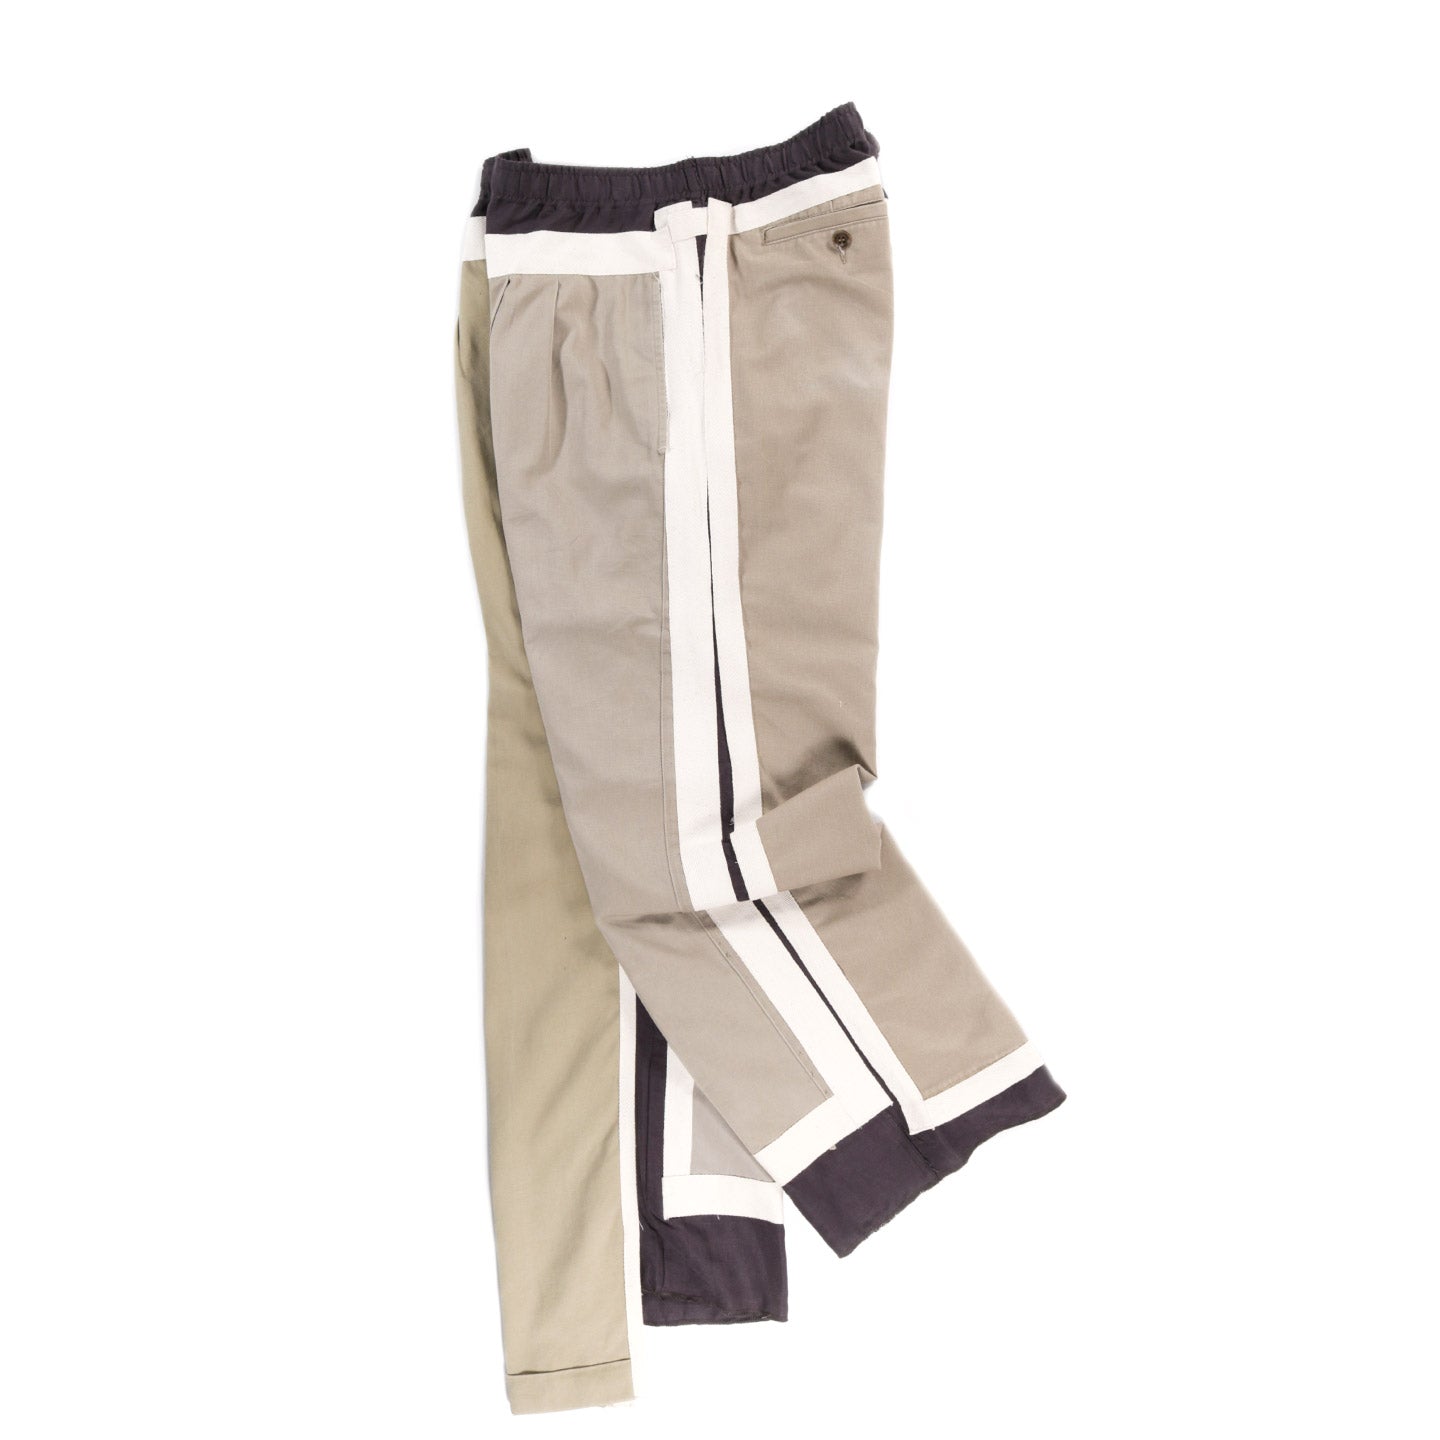 REBUILD BY NEEDLES CHINO COVERED PANT CHARCOAL - L (B)